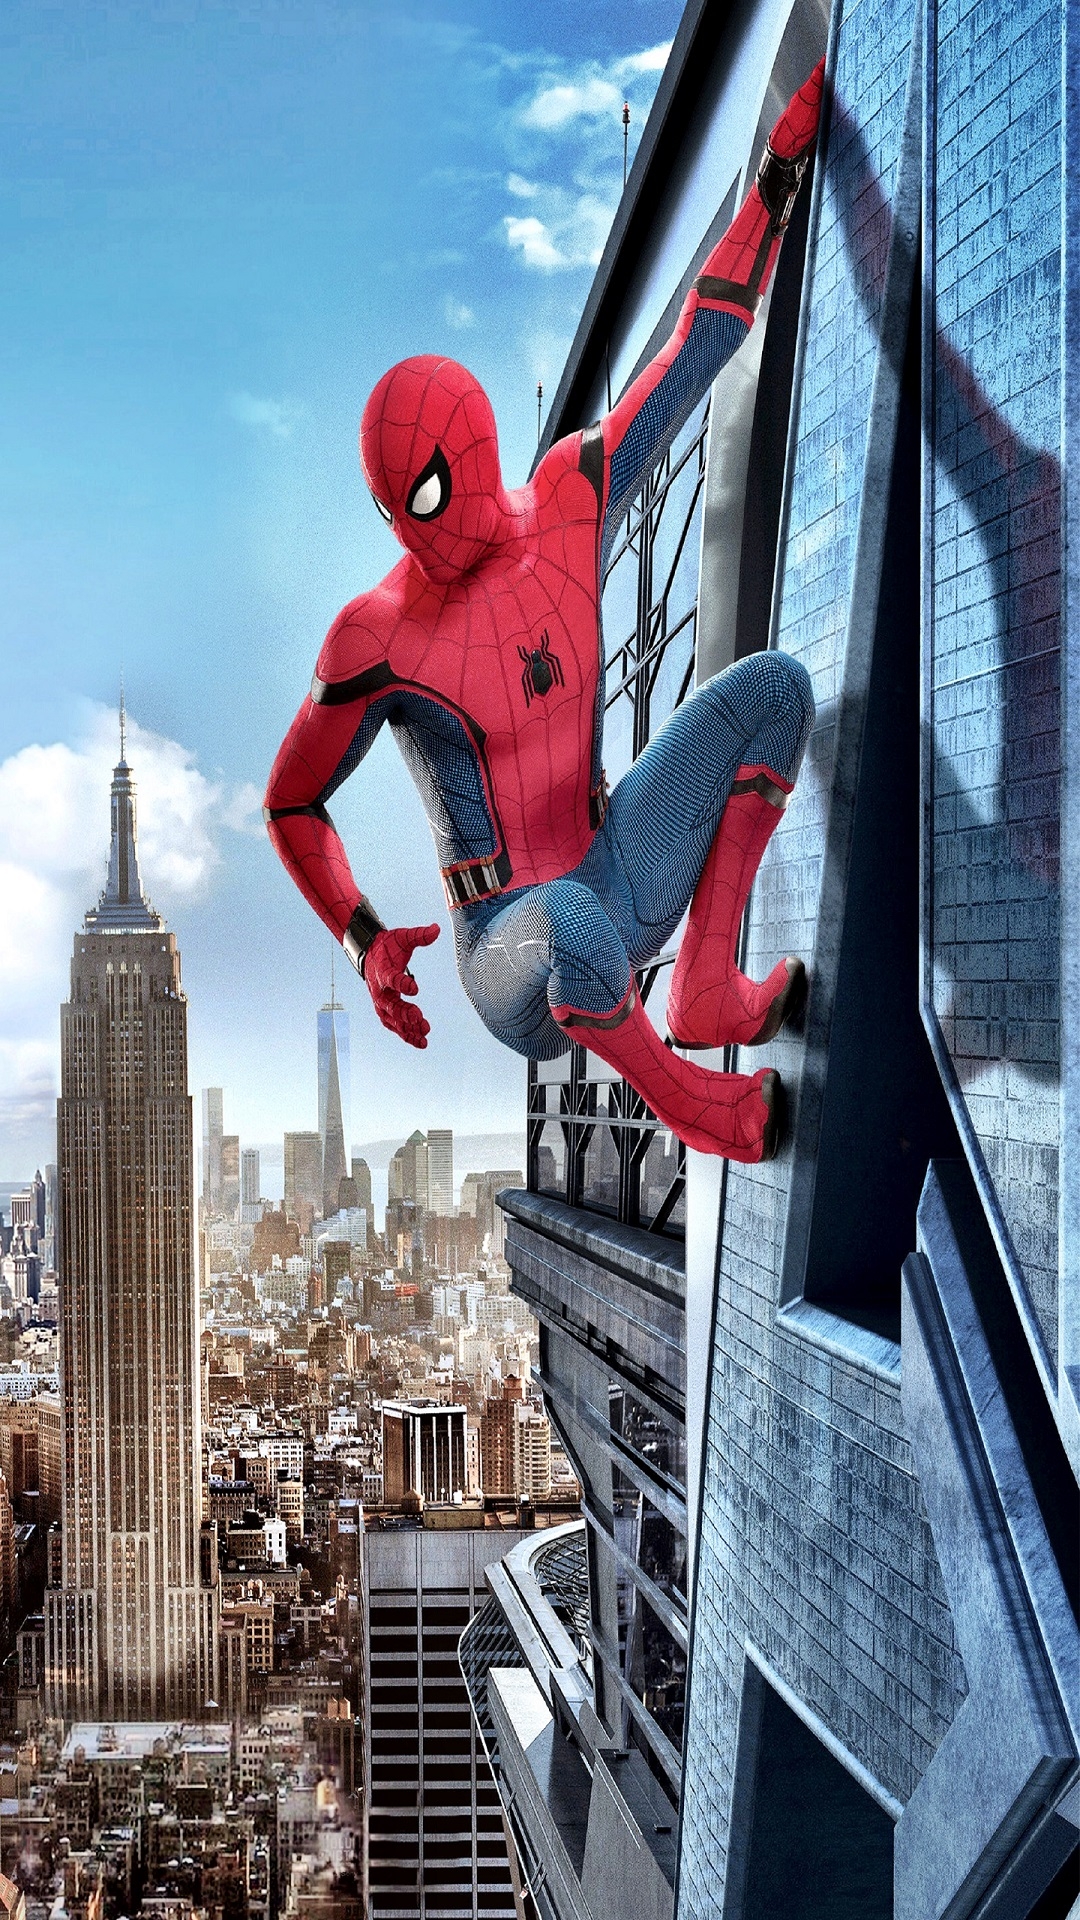 Spiderman Homecoming for Apple iPhone 6S & 7 Plus resolution